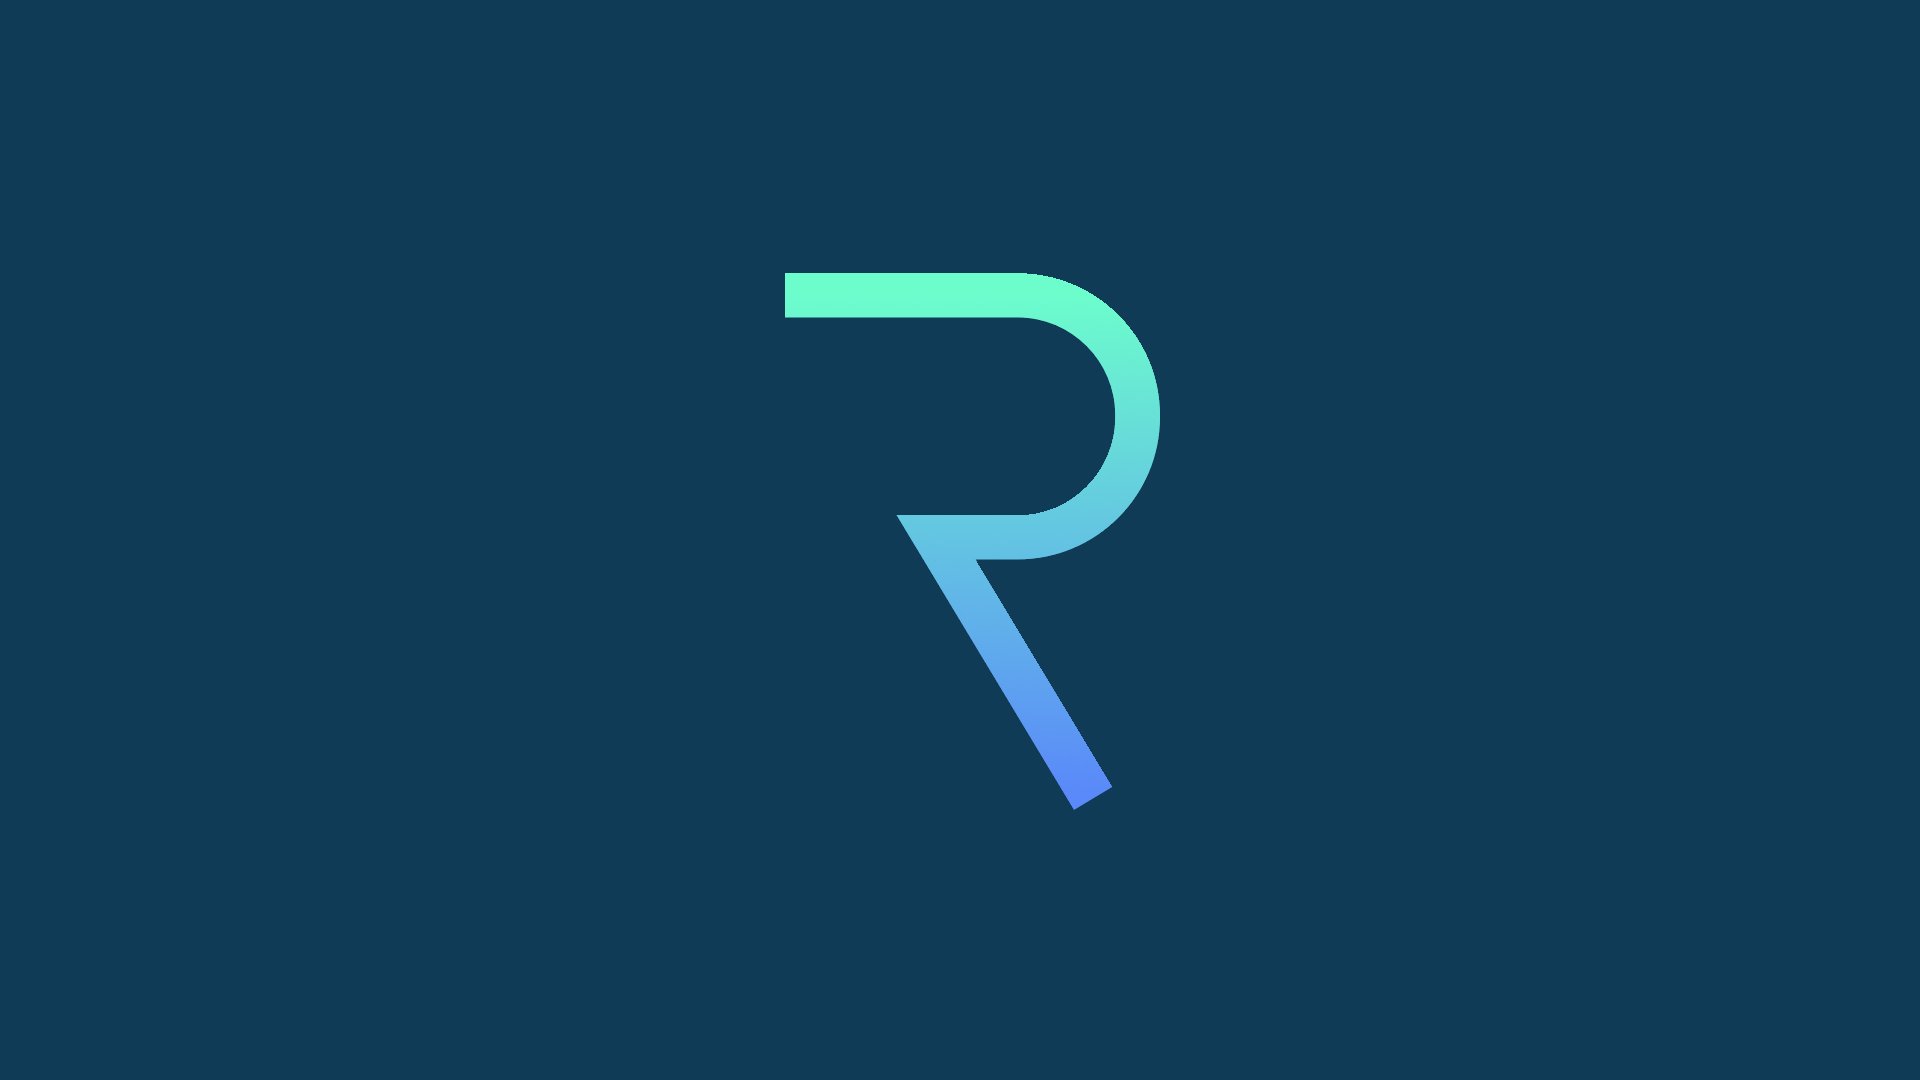 request network coin